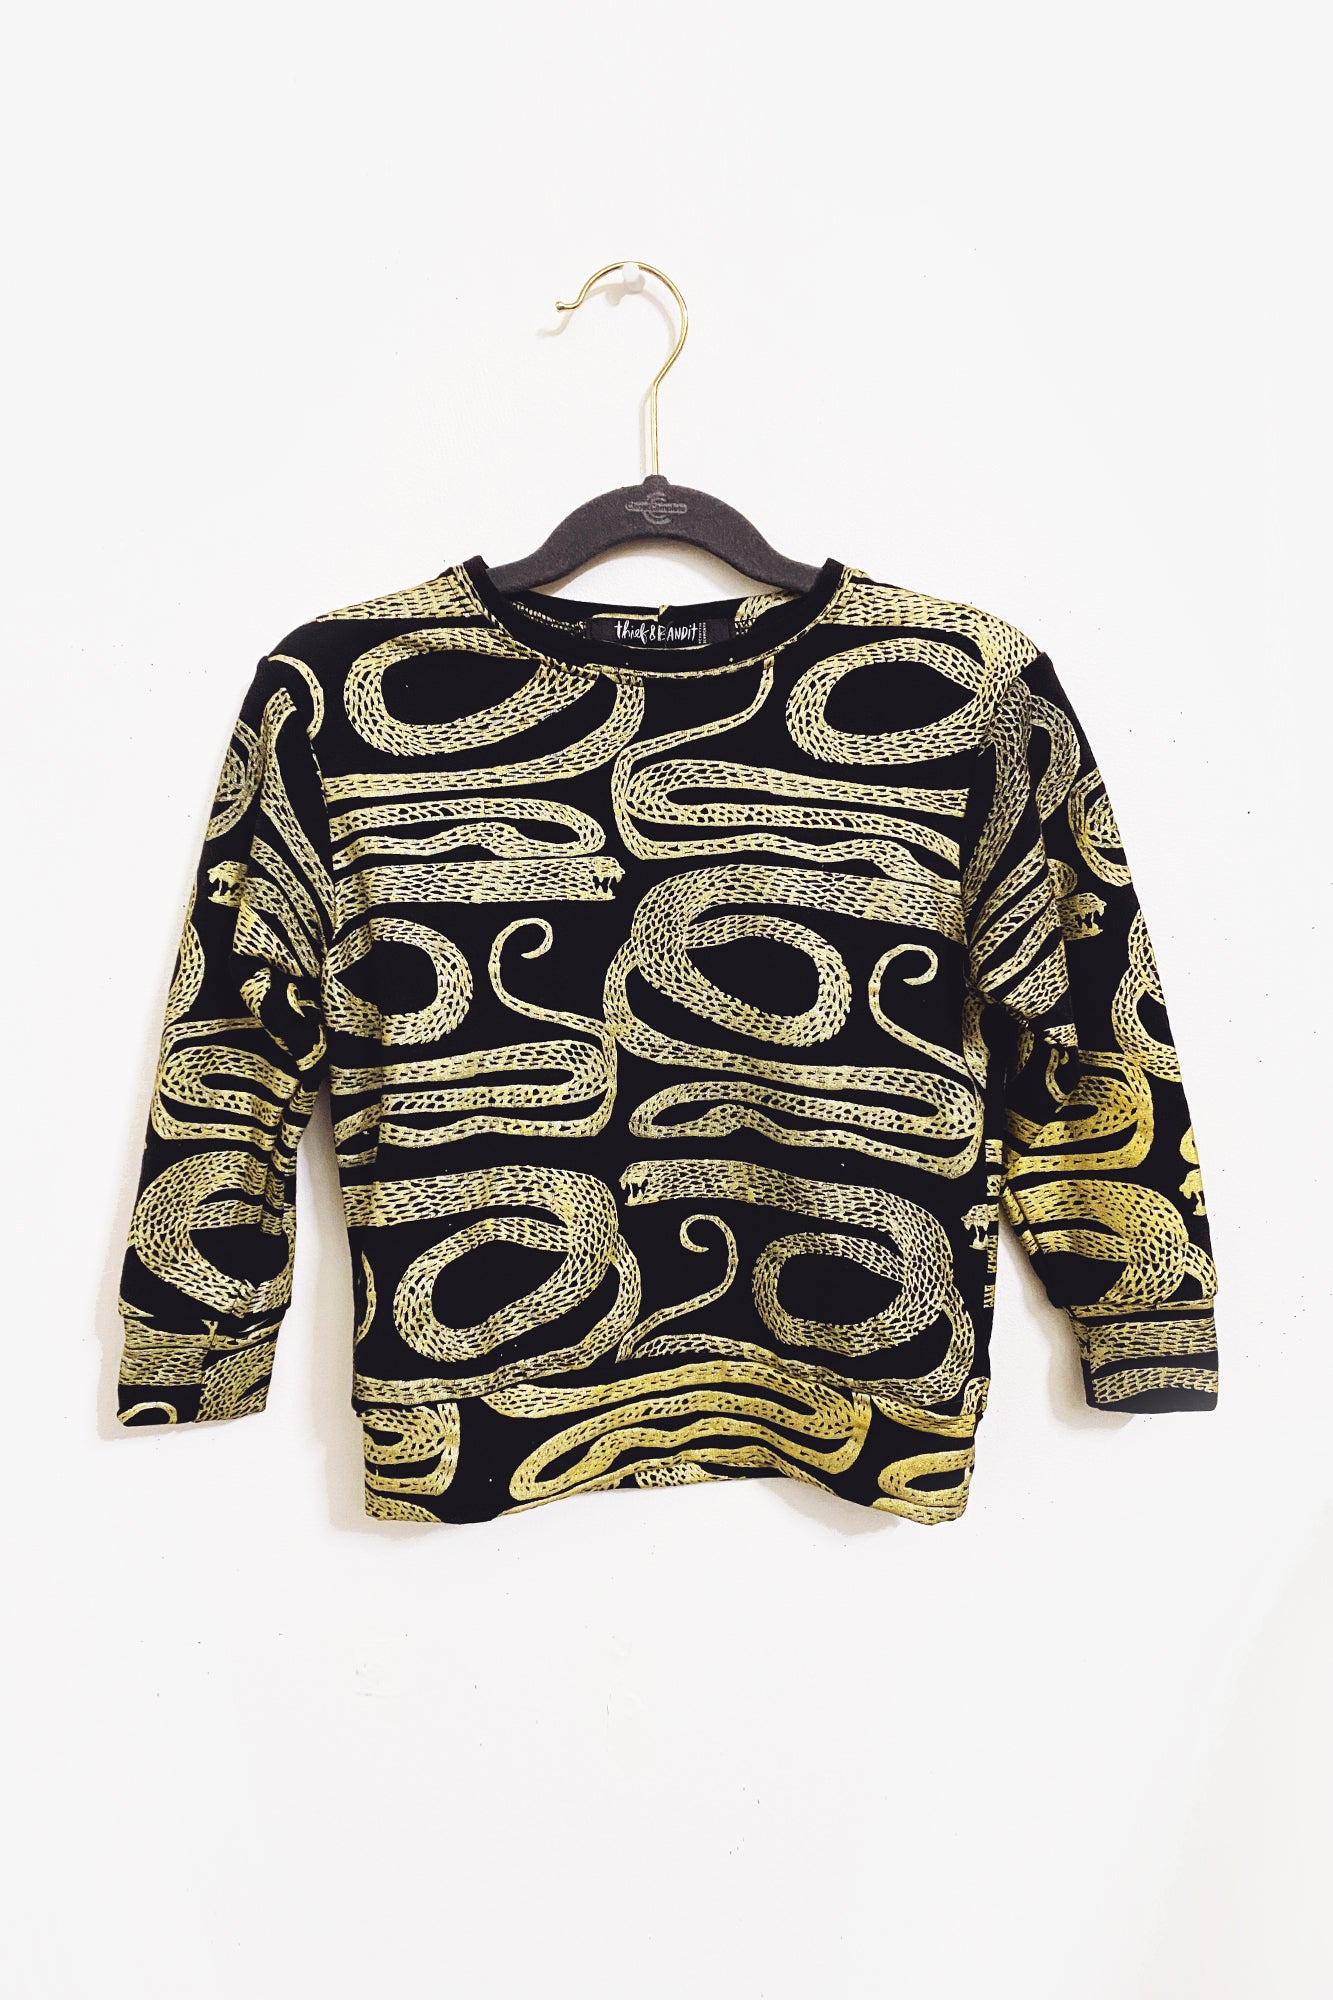 Gold on Black Serpent Kids French Terry Sweatshirt in Size 3T and 4T